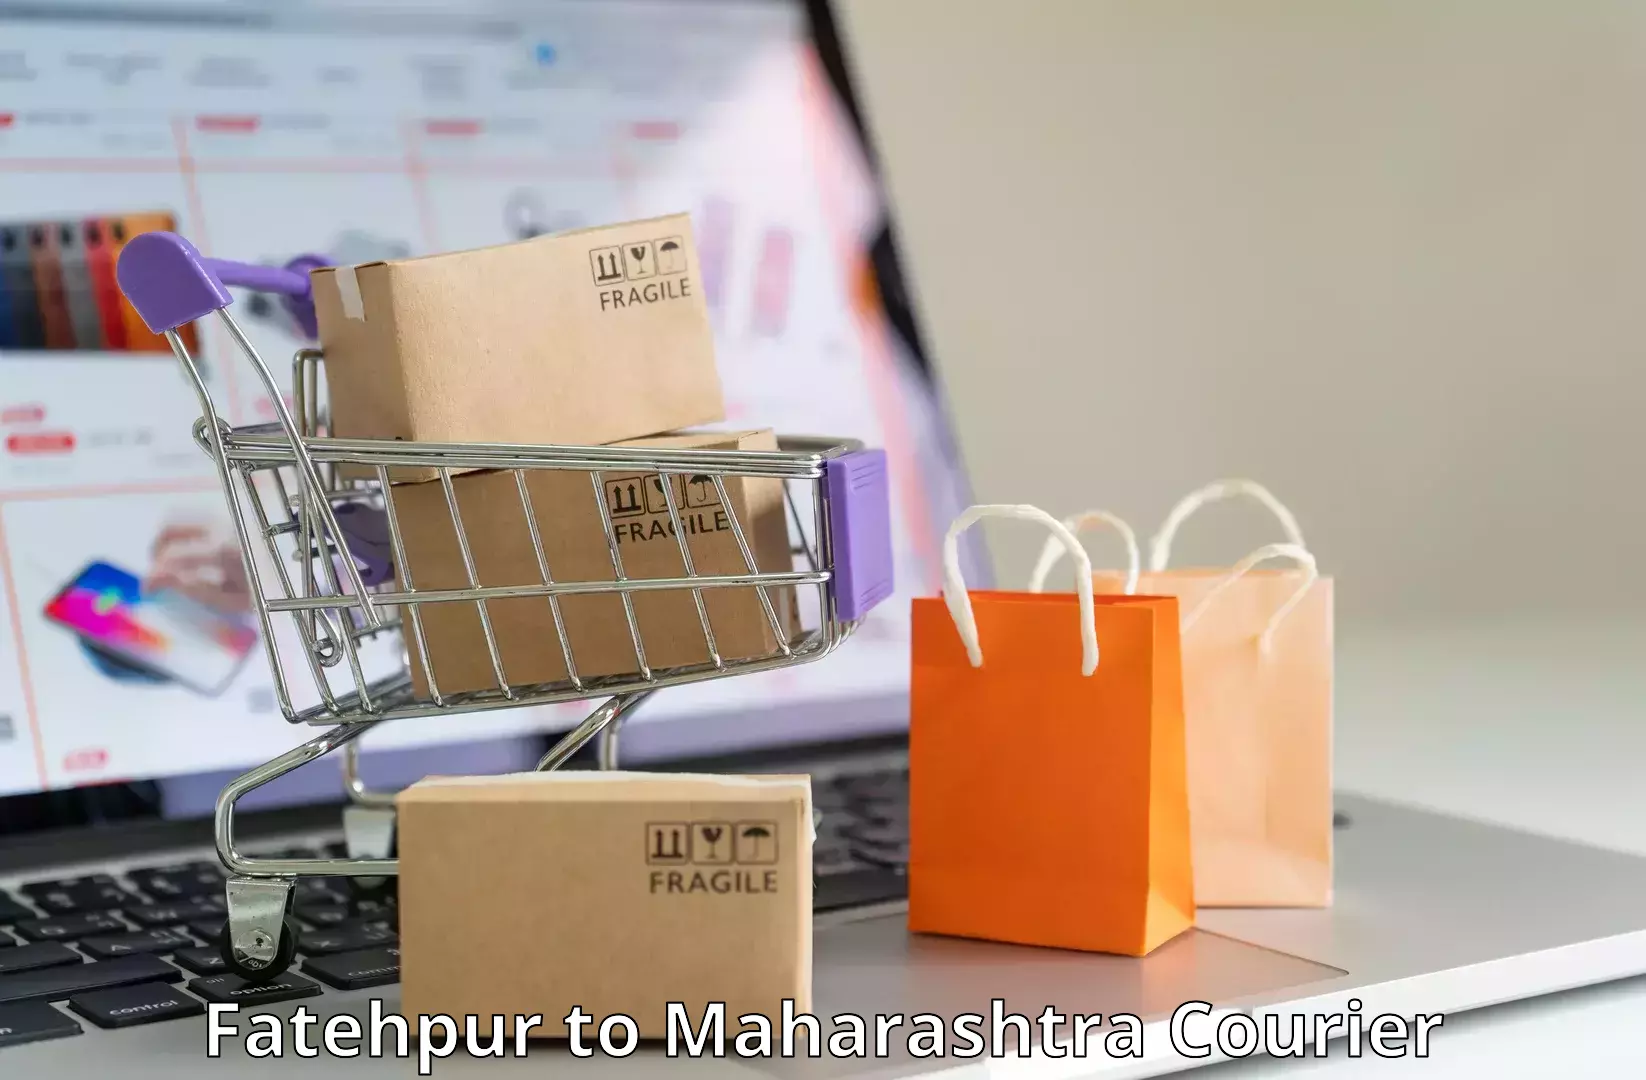 Professional courier services Fatehpur to Shrirampur